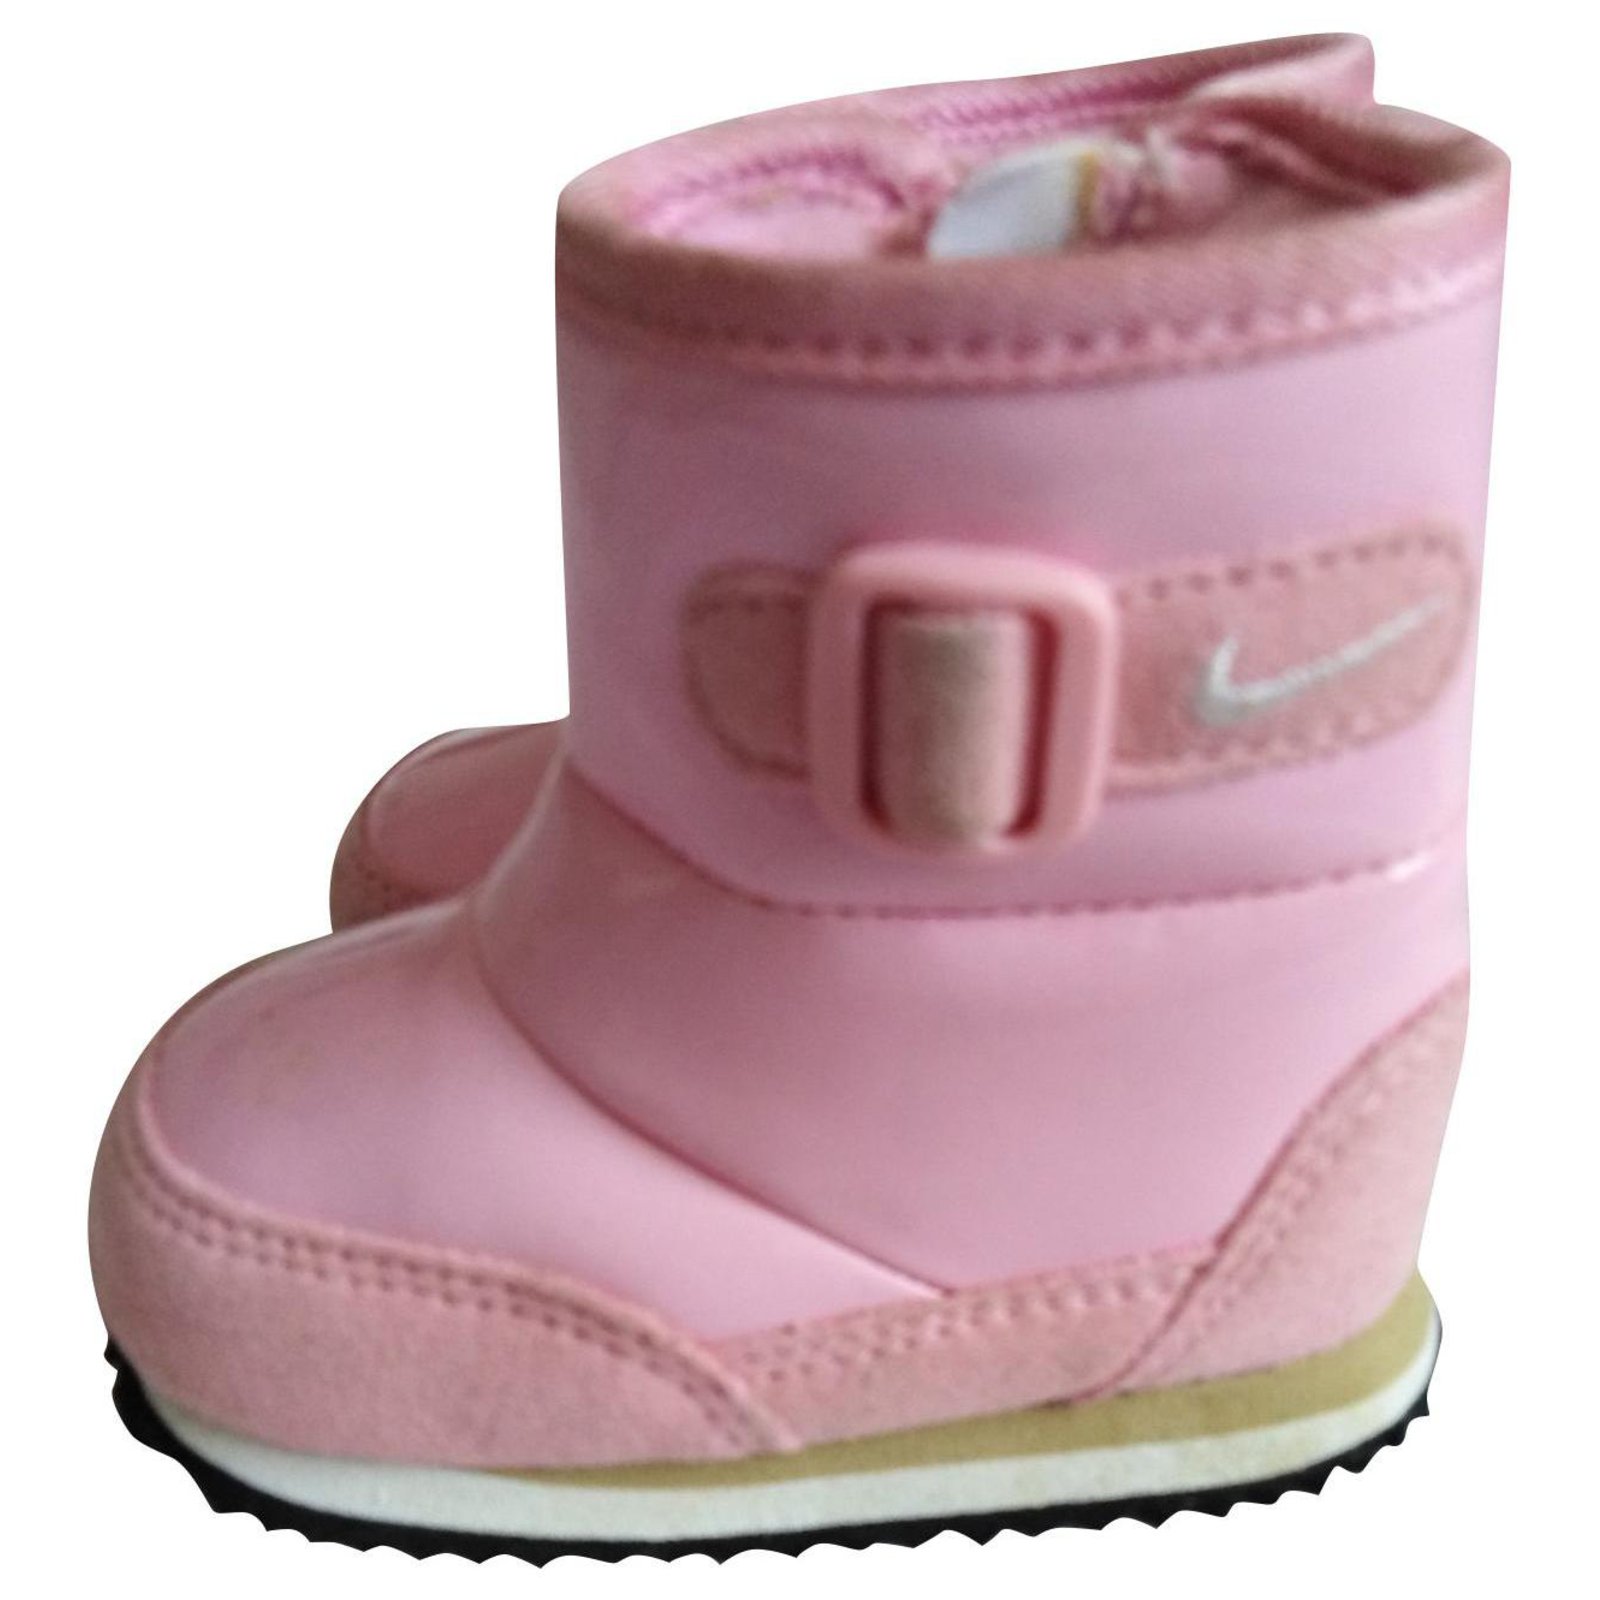 Nike Baby boots Boots Other Pink ref 